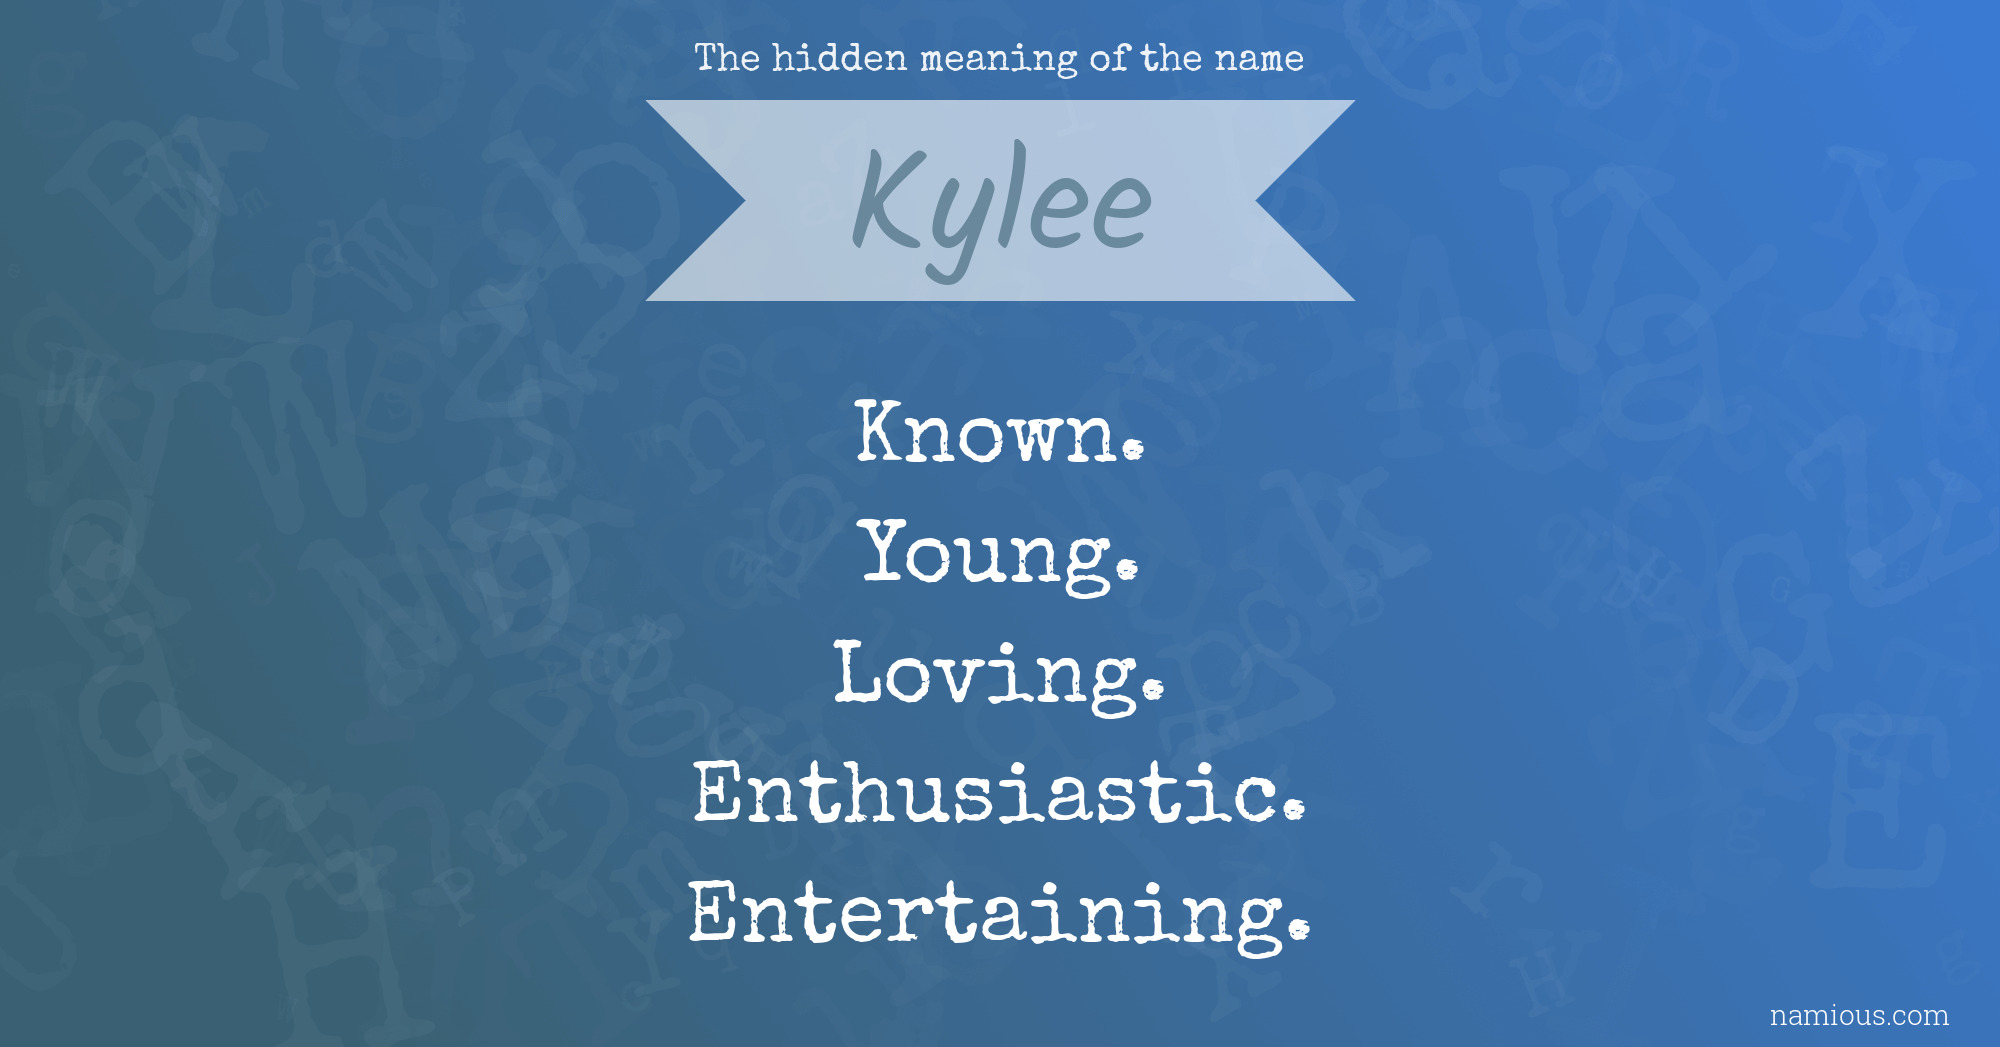 The hidden meaning of the name Kylee